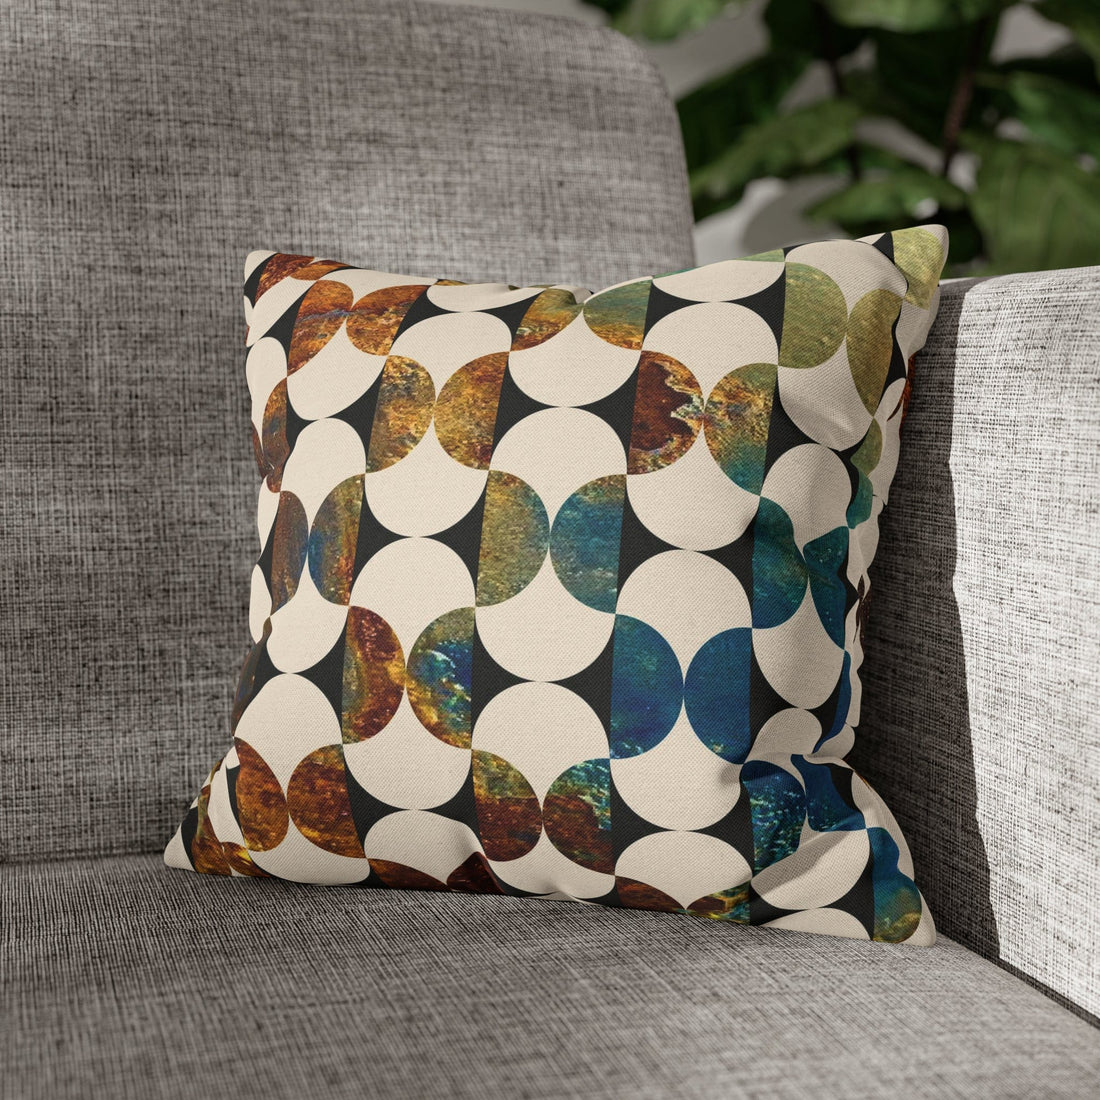 Kate McEnroe New York Mid Century Modern Geometric Abstract Throw Pillow Covers, Brown, Blue, Beige, 50s Retro Living Room, Bedroom Cushion CoversThrow Pillow Covers28202314644540254785